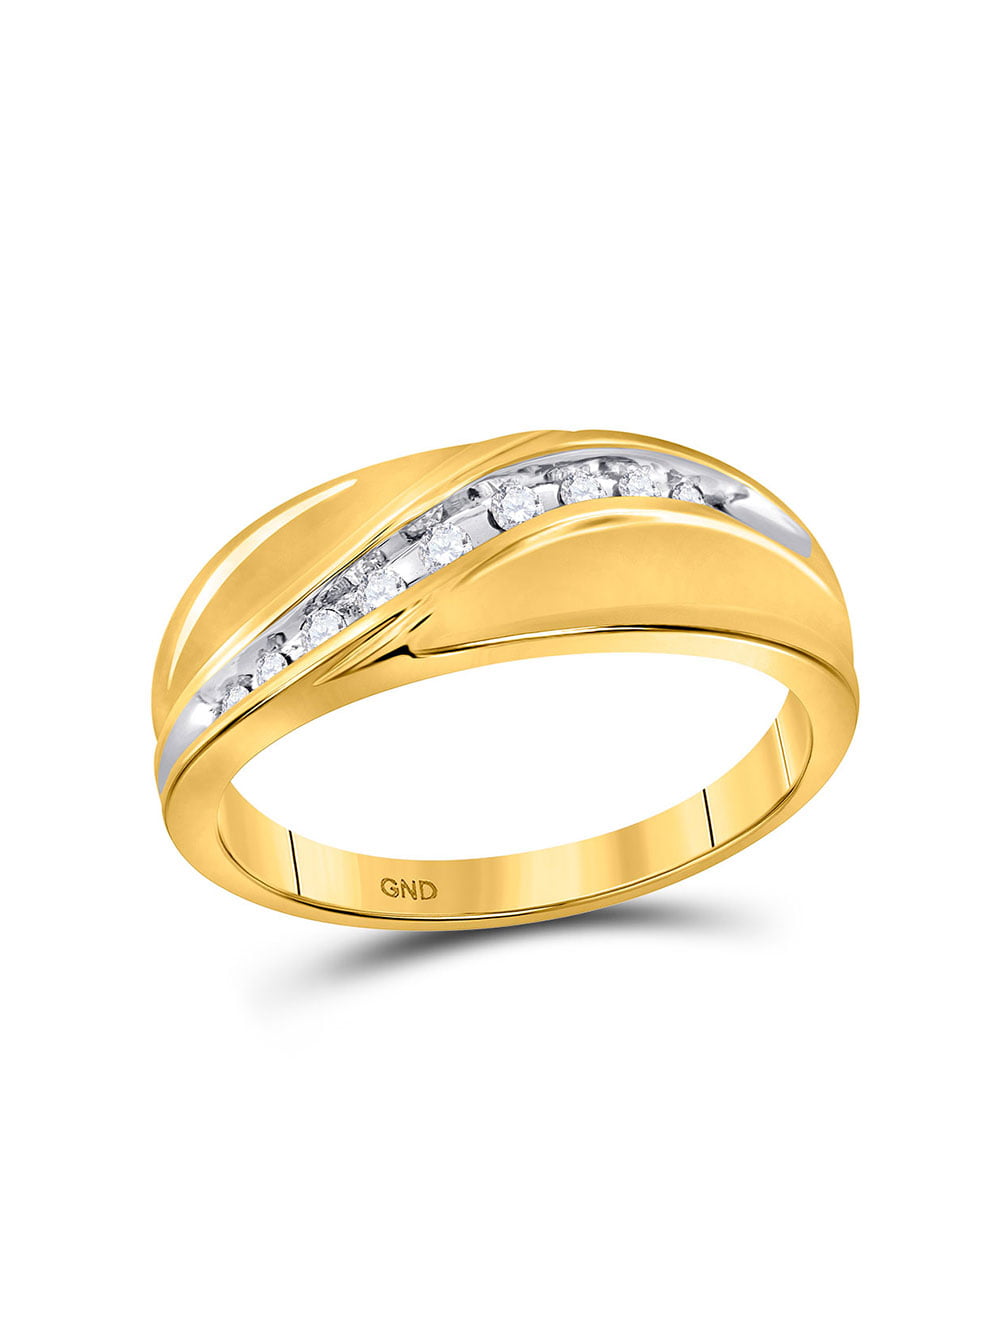 1/10 cttw, Diamond Wedding Band in 10K Yellow Gold Size-11 G-H,I2-I3